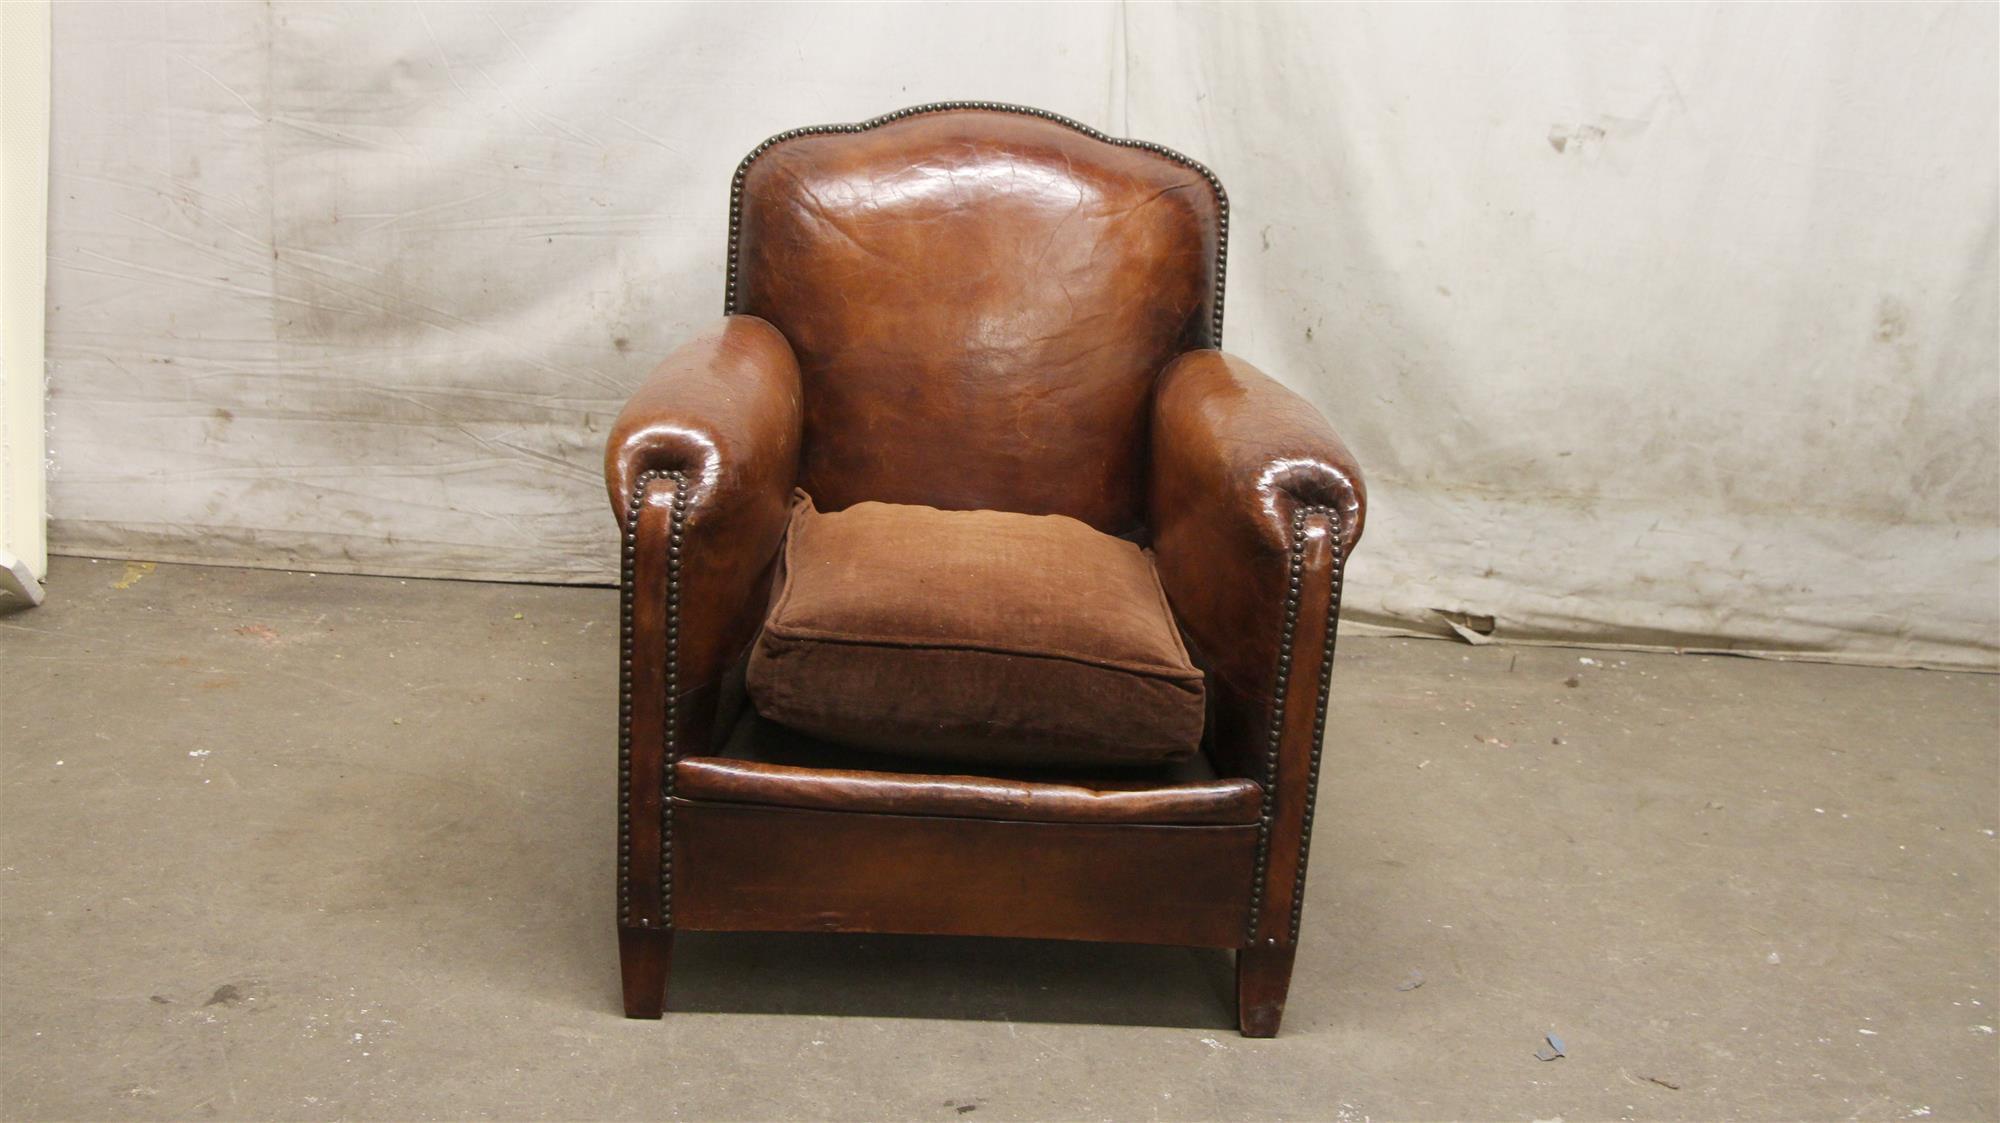 1980s brown leather vintage club chair with wooden feet from France. This can be seen at our 5 East 16th St location on Union Square in Manhattan.